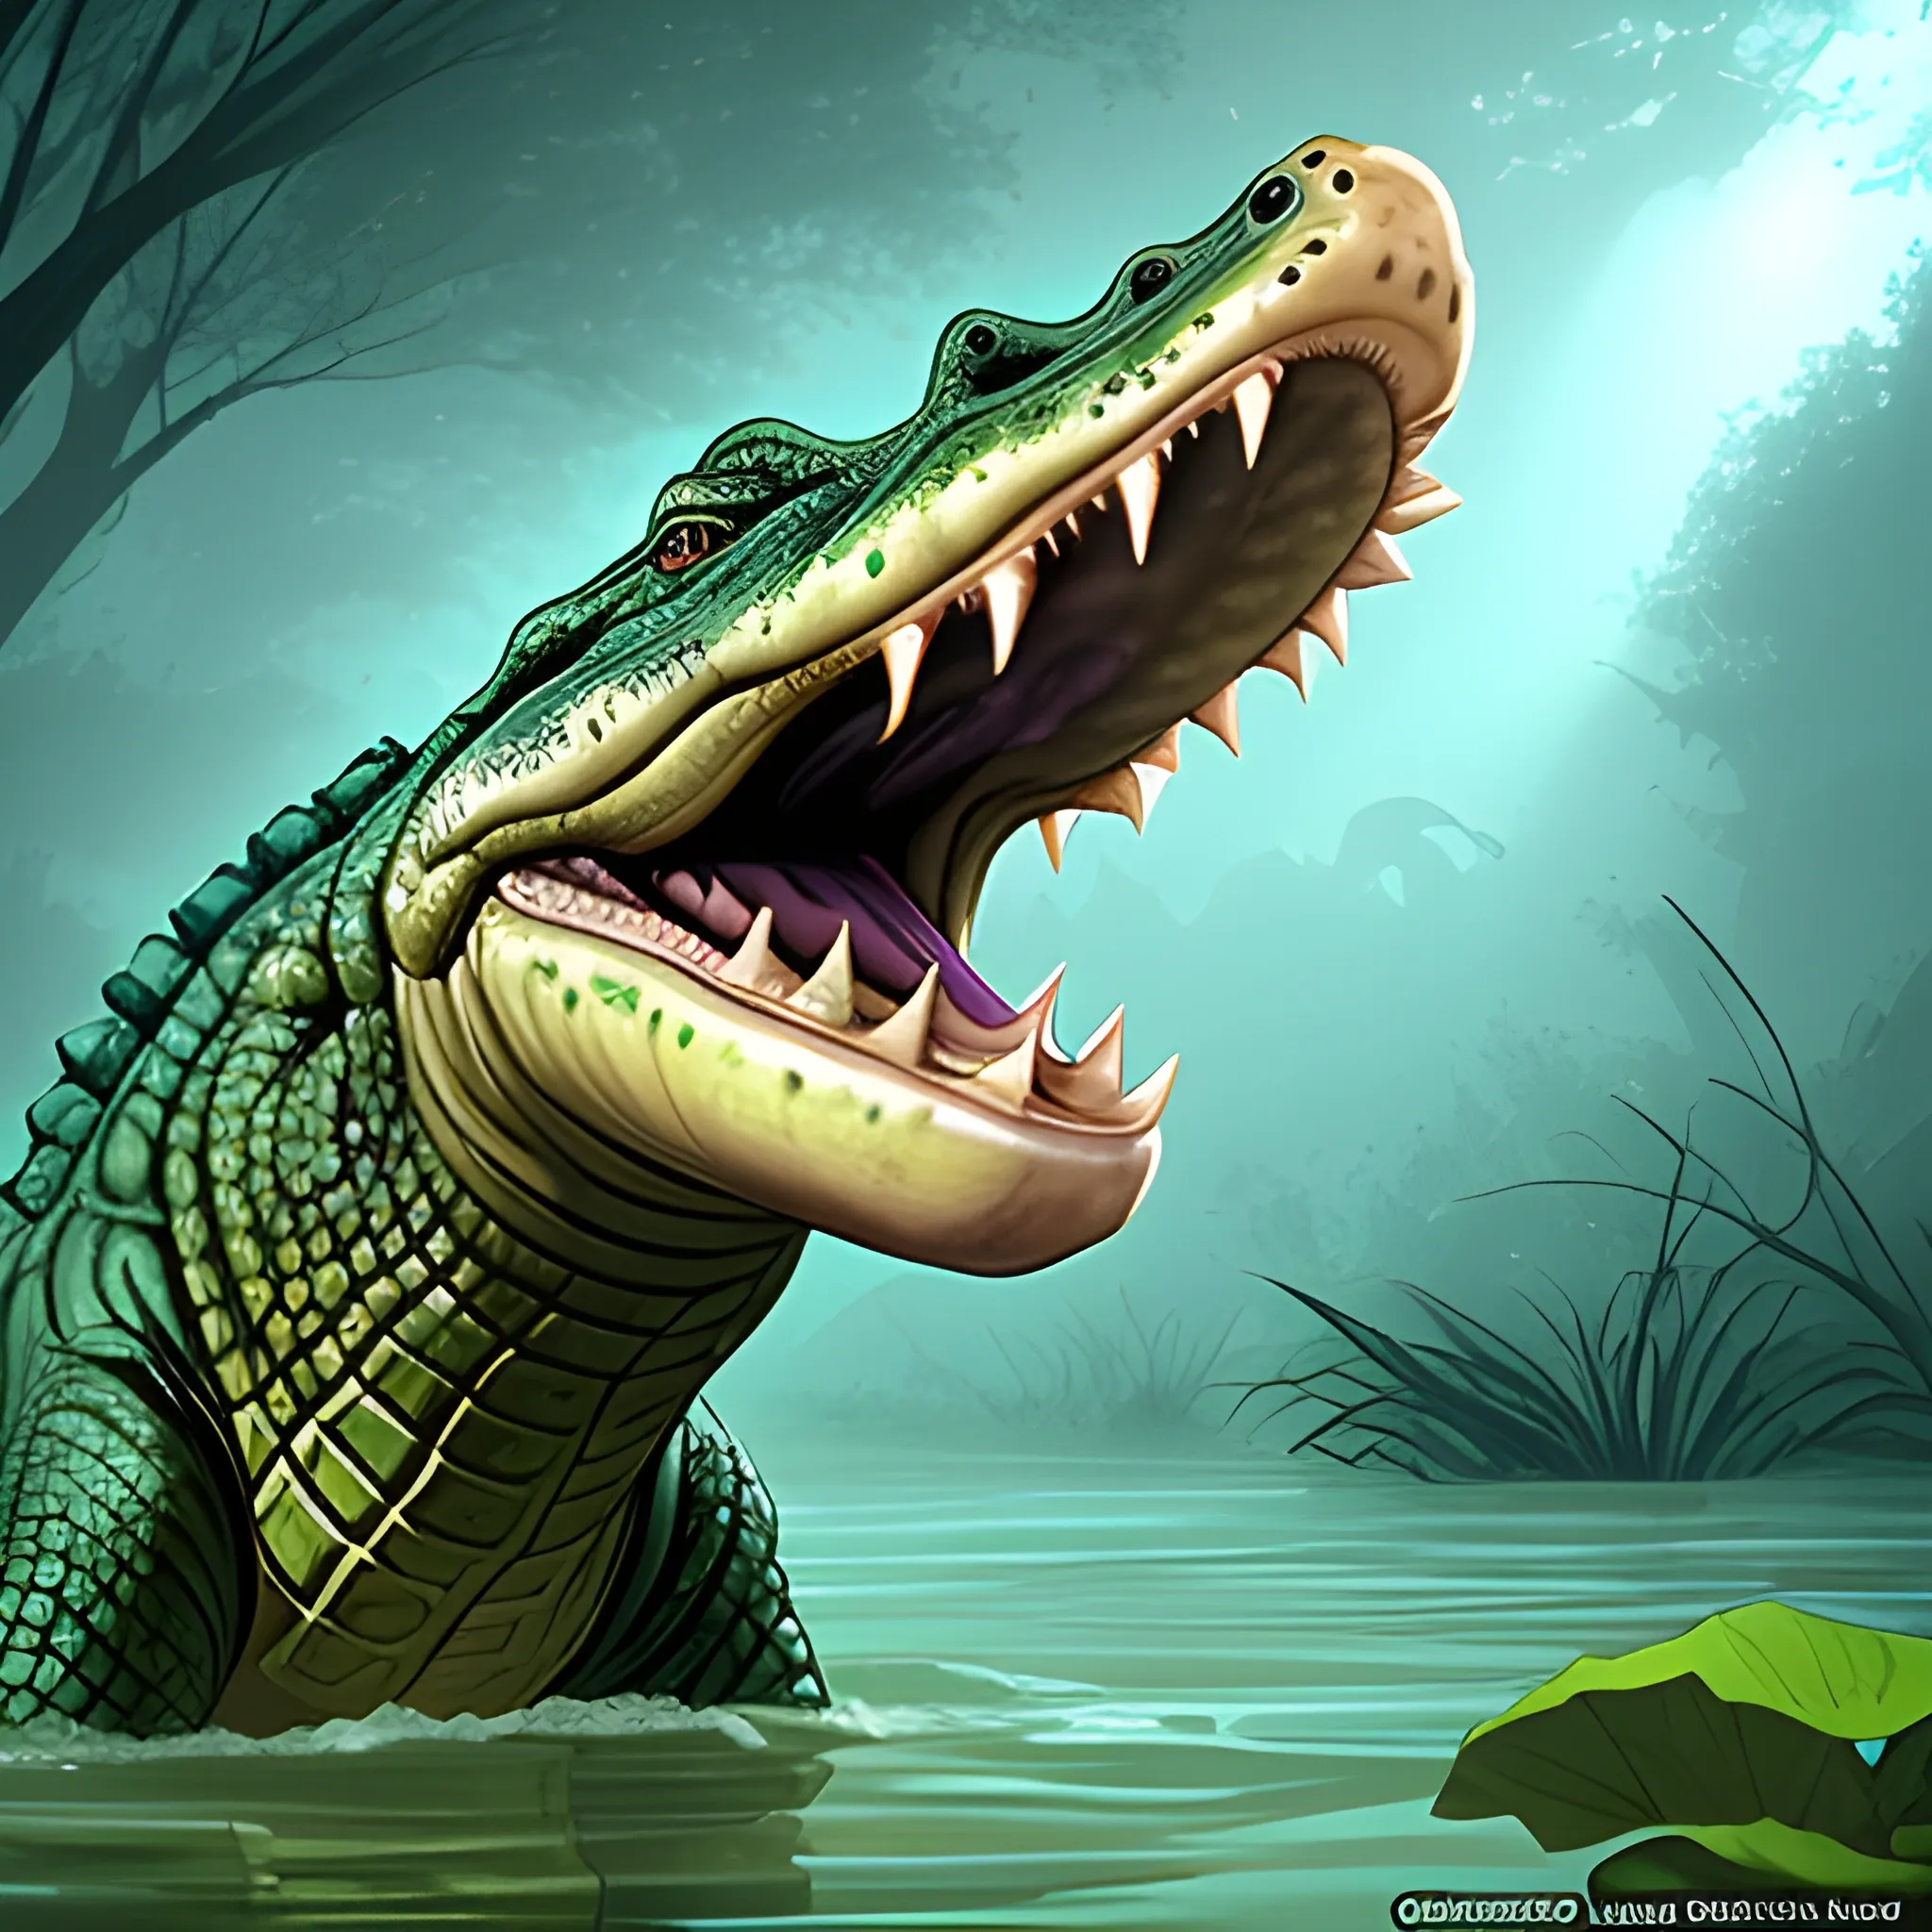 Appearance: The Crocodile is a large and powerful reptile, known for its distinctive long snout, sharp teeth, and armored body. Its scales can have various shades of green, brown, or gray, blending in with the murky waters and marshes it inhabits. The Crocodile's eyes and nostrils are positioned on the top of its head, allowing it to remain mostly submerged while still keeping a watchful eye on potential prey.

Features: The Crocodile is an apex predator in aquatic environments, using its powerful jaws to seize and drag its prey underwater. It possesses incredible strength and resilience, making it a fearsome hunter and a challenging opponent for adventurers who venture into its territory. Crocodiles are well-adapted for both land and water, able to move quickly on land and remain submerged for extended periods.

Habitat: Crocodiles are typically found in freshwater bodies such as rivers, lakes, and swamps, though they can also inhabit saltwater habitats like estuaries and coastal areas. They are highly territorial creatures, claiming areas of water as their own hunting grounds. In your DND world, they might be guardians of hidden treasures or sacred places.

Behavior: Crocodiles are ambush predators, relying on stealth and patience to catch their prey unaware. They lie submerged, often with only their eyes and nostrils visible, and strike with lightning speed when an opportunity presents itself. Crocodiles are more aggressive during their breeding season or if they feel threatened.

Role in the World: In your DND world, Crocodiles could be symbols of primal power and ancient guardians. They might be revered or feared by local tribes as creatures of great significance in their myths and beliefs. Druids and rangers might have a connection with Crocodiles, viewing them as an essential part of the natural order.

Encountering a Crocodile in the wild can be a dangerous and adrenaline-pumping event for adventurers. Players must be cautious around bodies of water known to be inhabited by Crocodiles, as these creatures can launch surprise attacks. Crossing rivers or exploring swampy terrain could become treacherous, and players will need to be vigilant to spot the telltale signs of lurking predators.

The presence of Crocodiles in your campaign adds an element of danger and excitement to aquatic and marshy environments. They can create memorable and intense encounters, challenging players to use their wits and skills to outmaneuver and defeat these fearsome reptilian predators. Additionally, the idea of crossing treacherous waters or exploring hidden marshlands where Crocodiles dwell can evoke a sense of adventure and exploration in your DND world.